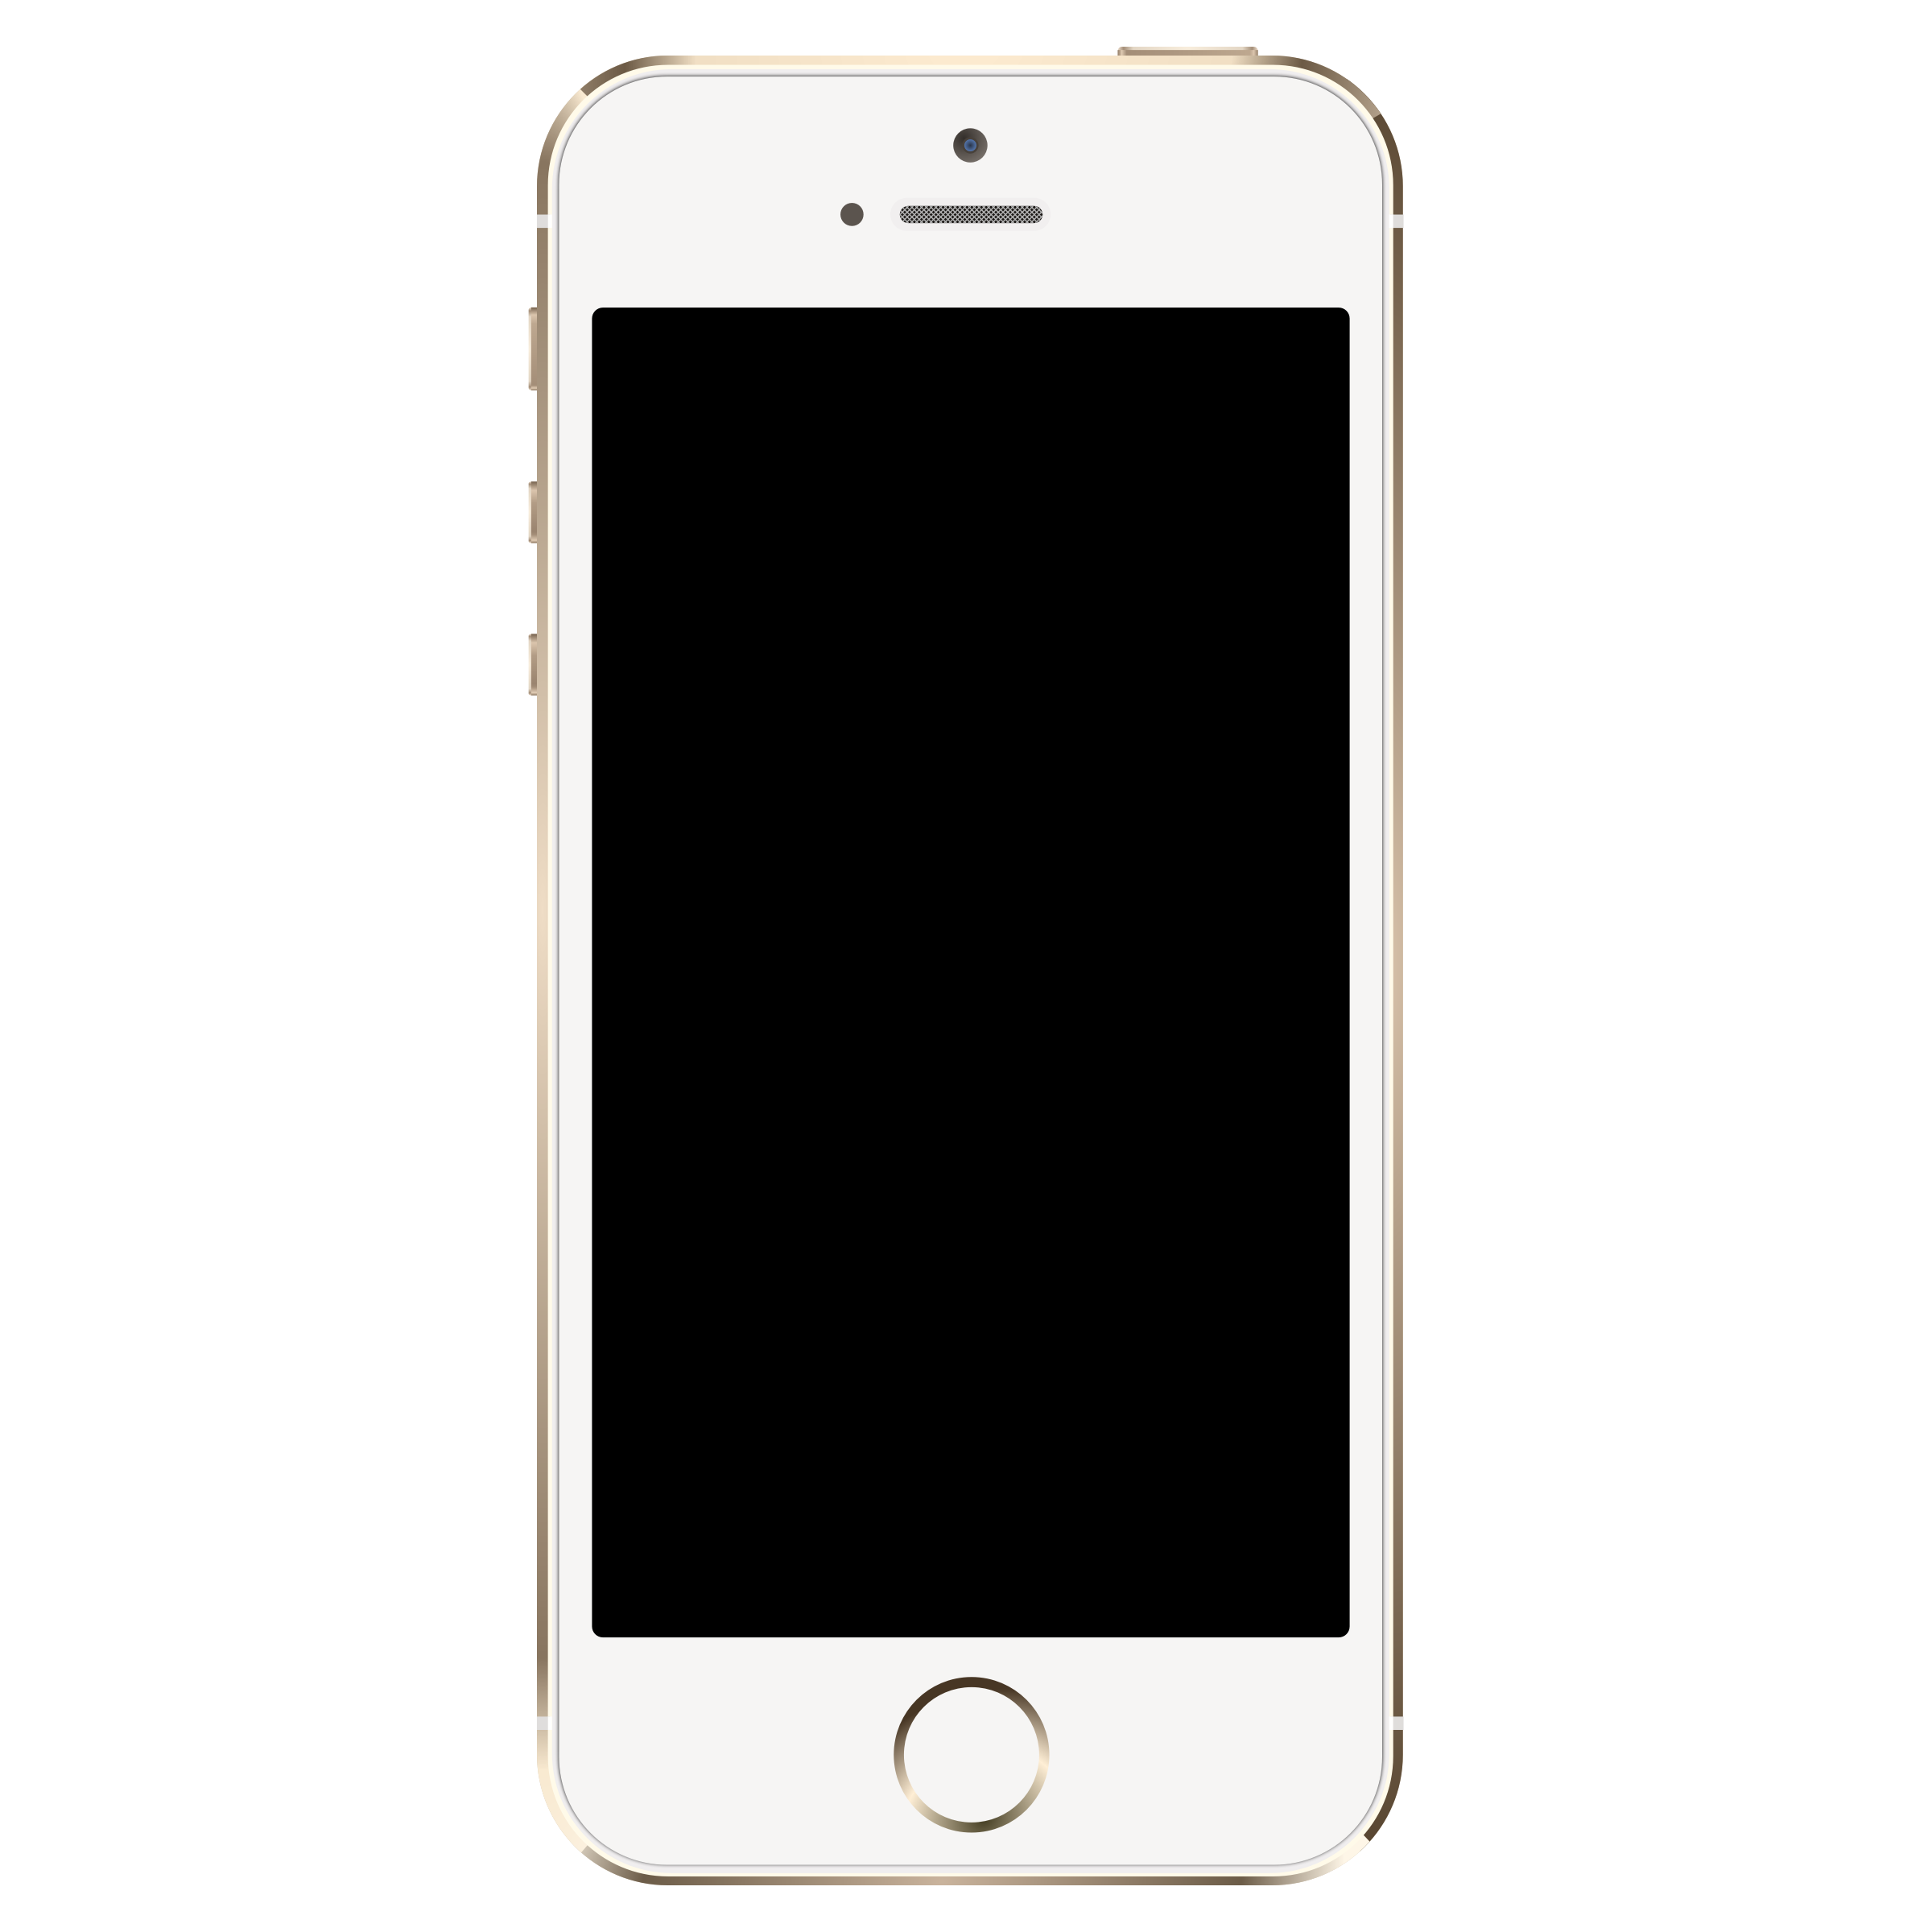 Free Iphone Clipart Png, Download Free Iphone Clipart Png png images